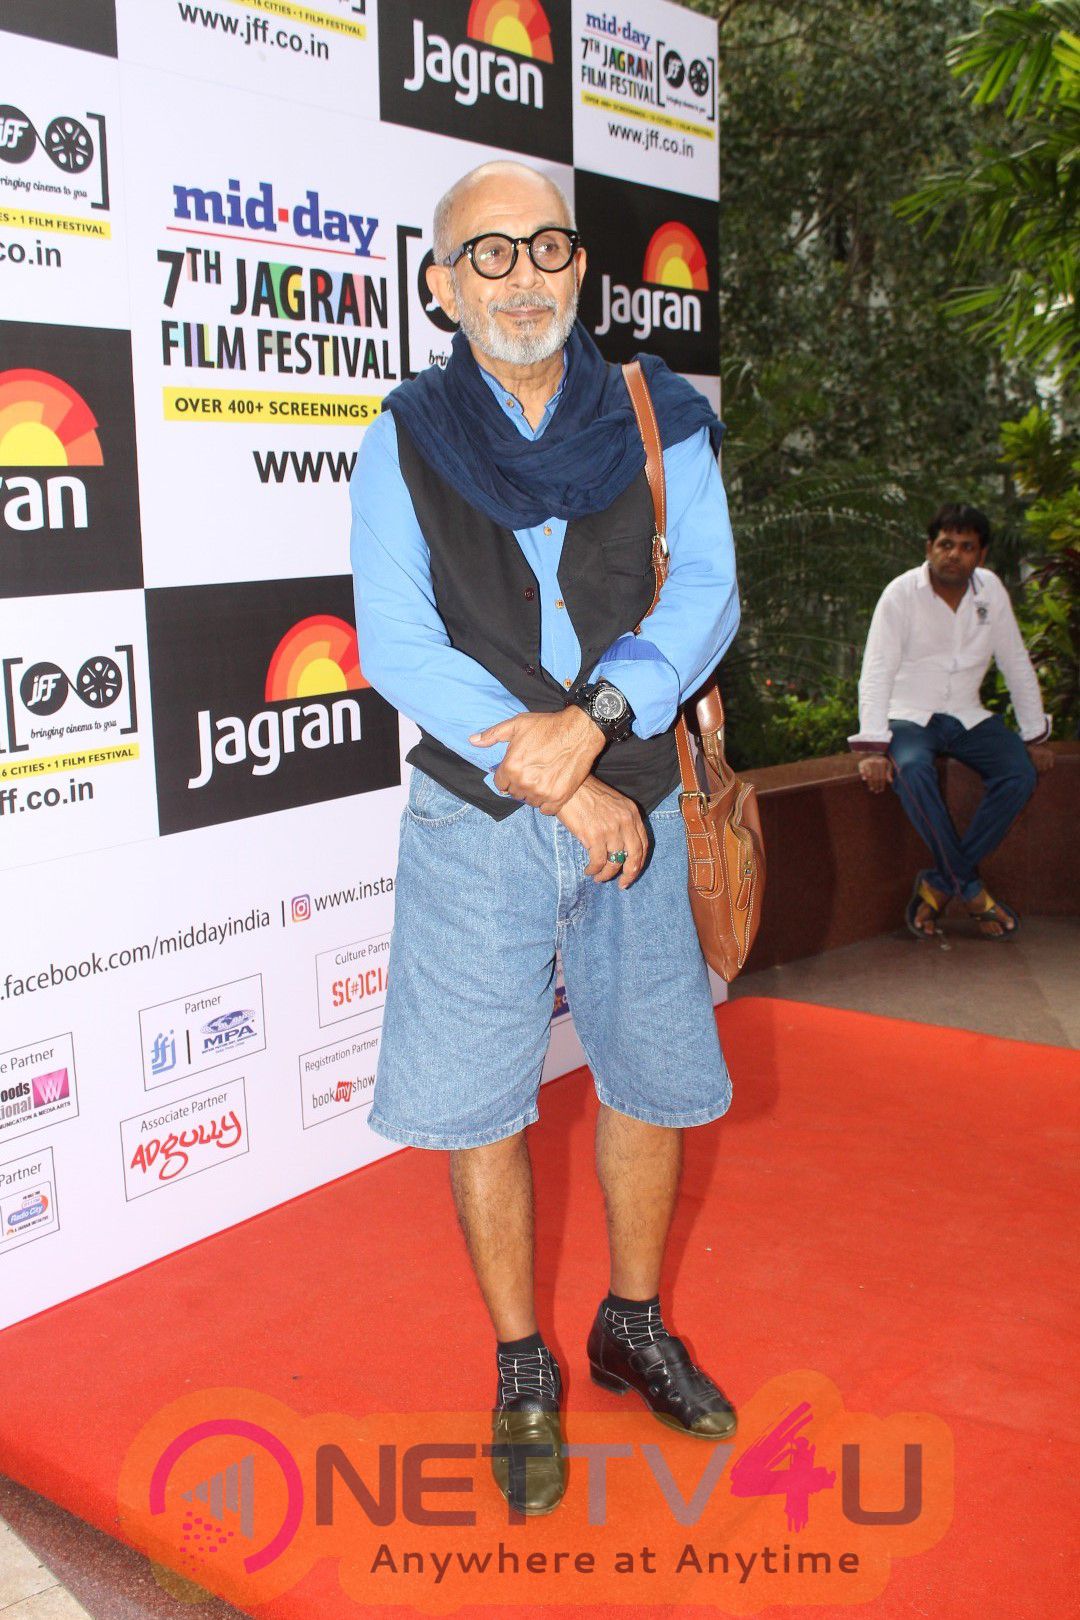 Opening Ceremony Of 7th Jagran Film Festival With Chief Guest Arjun Kapoor Stills Hindi Gallery